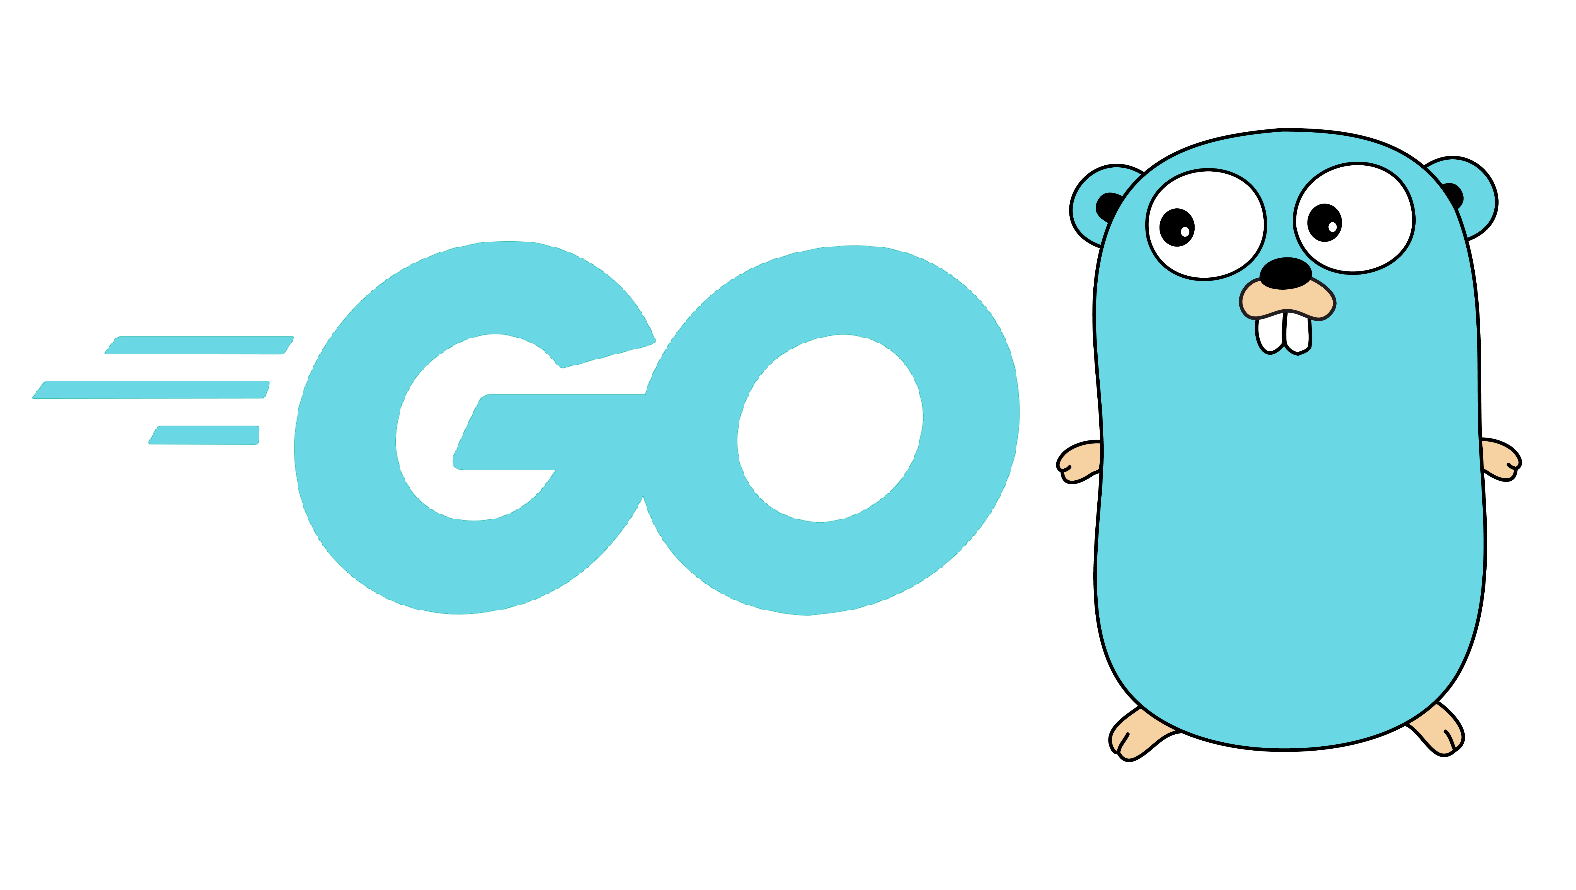 How to Install Go on Debian 10 Linux